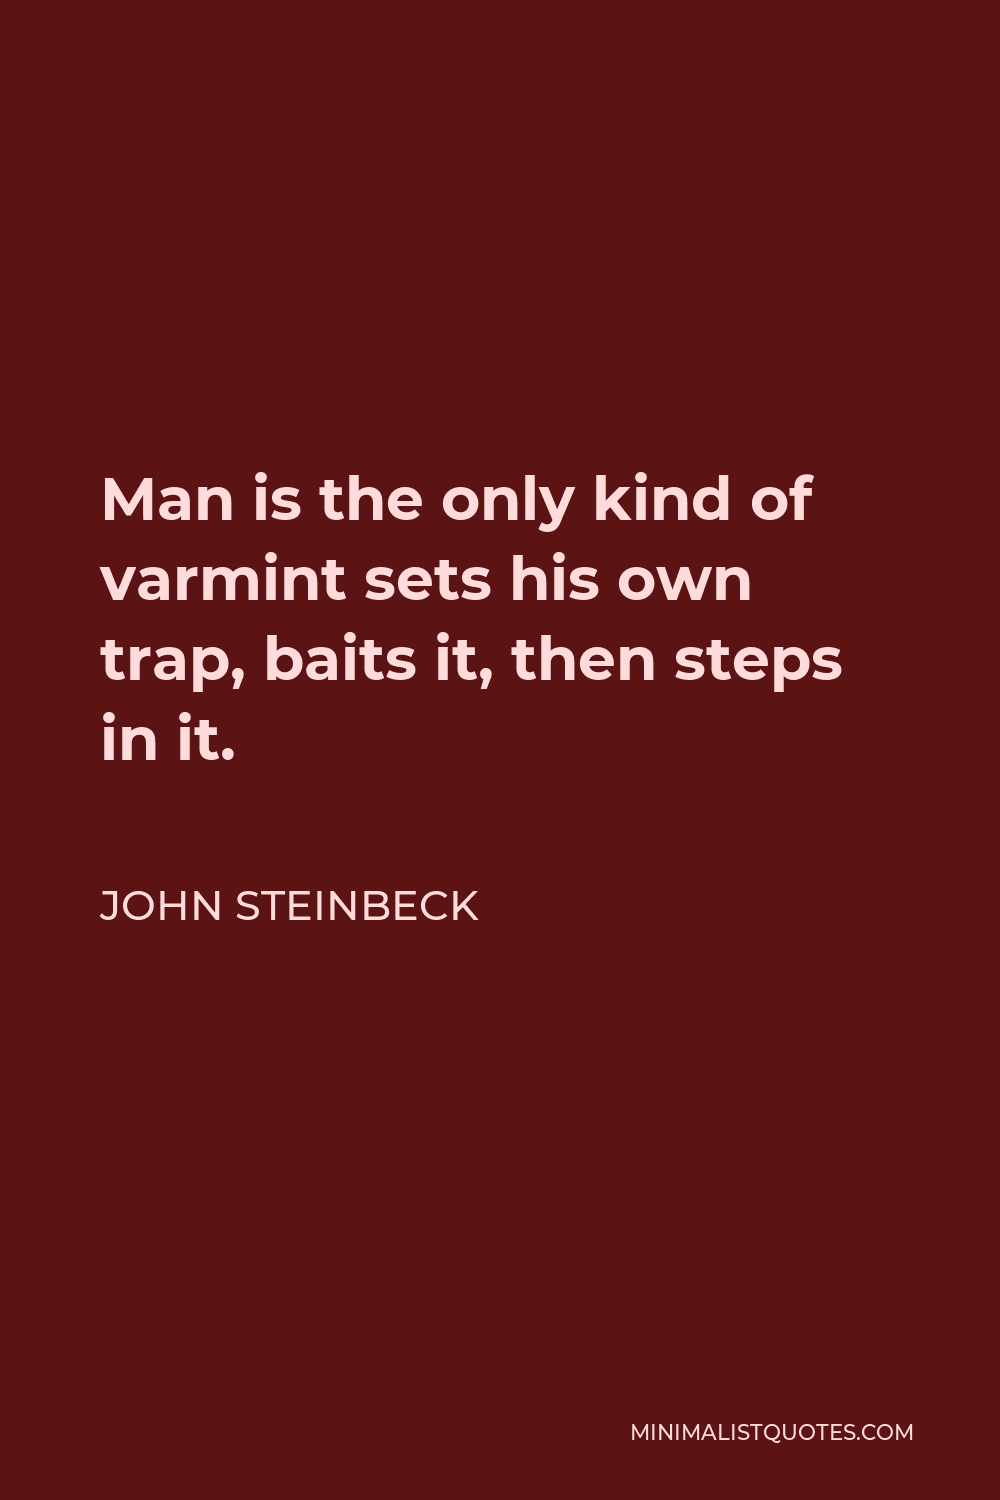 John Steinbeck Quote - Man is the only kind of varmint sets his own trap, baits it, then steps in it.